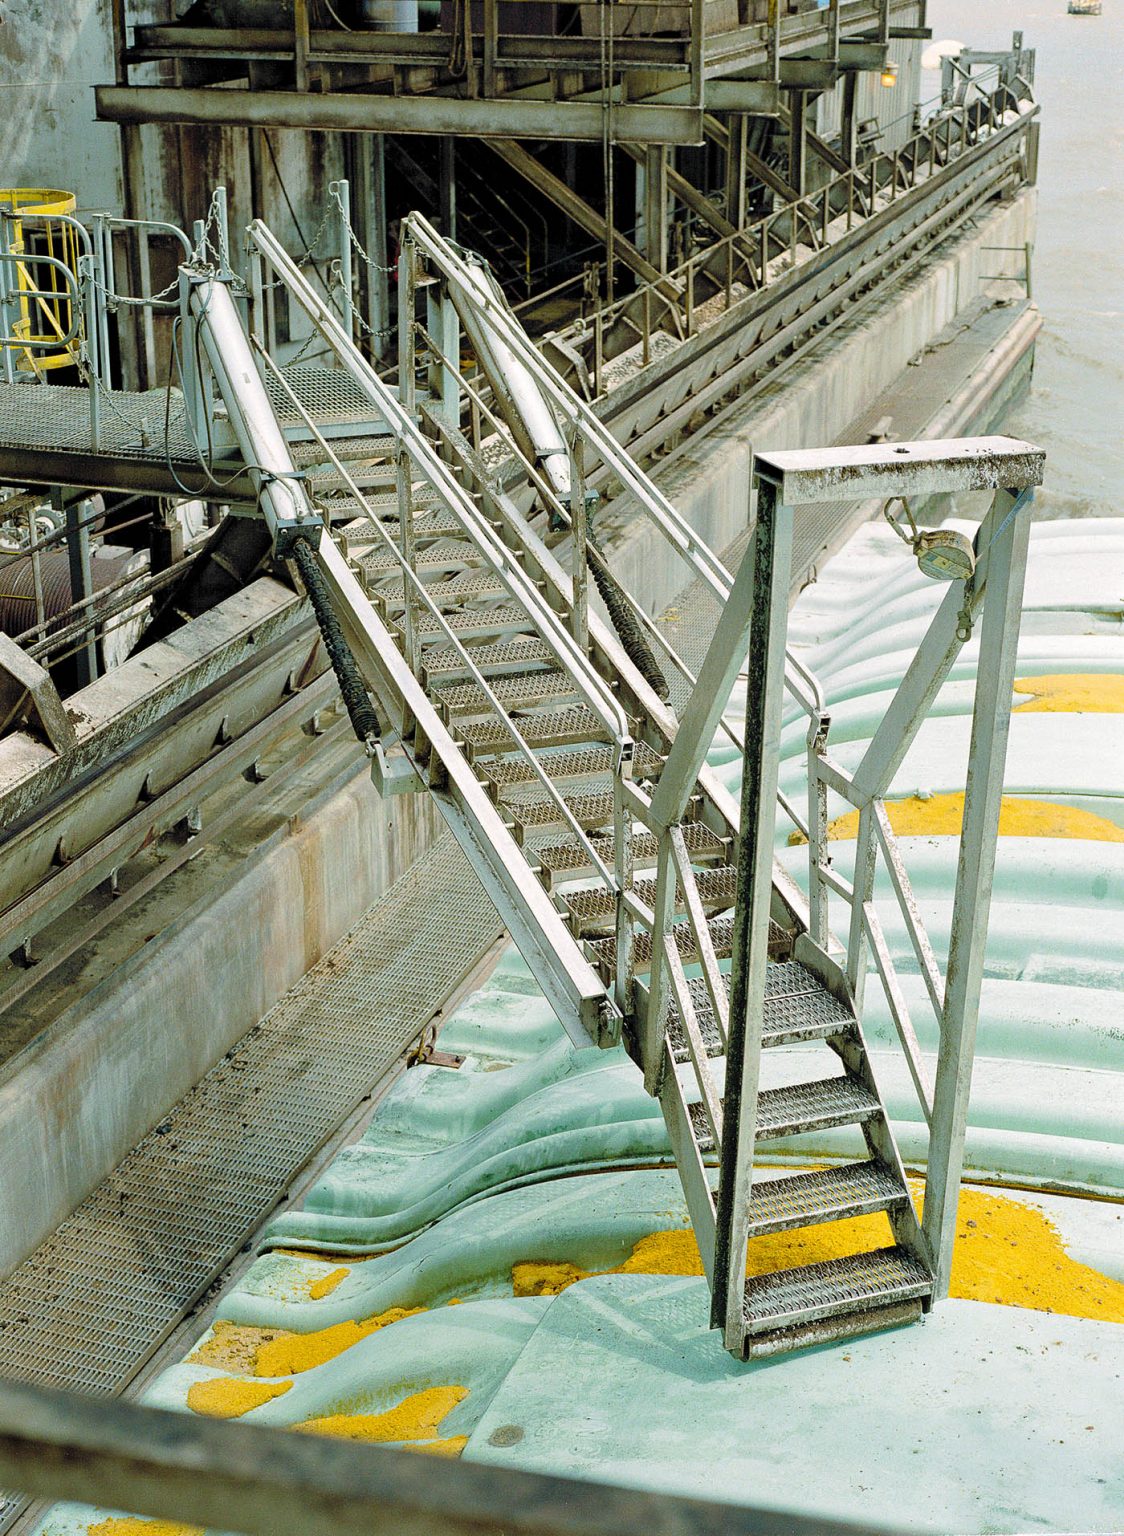 A telescoping marine gangway extends from a ship to a barge.